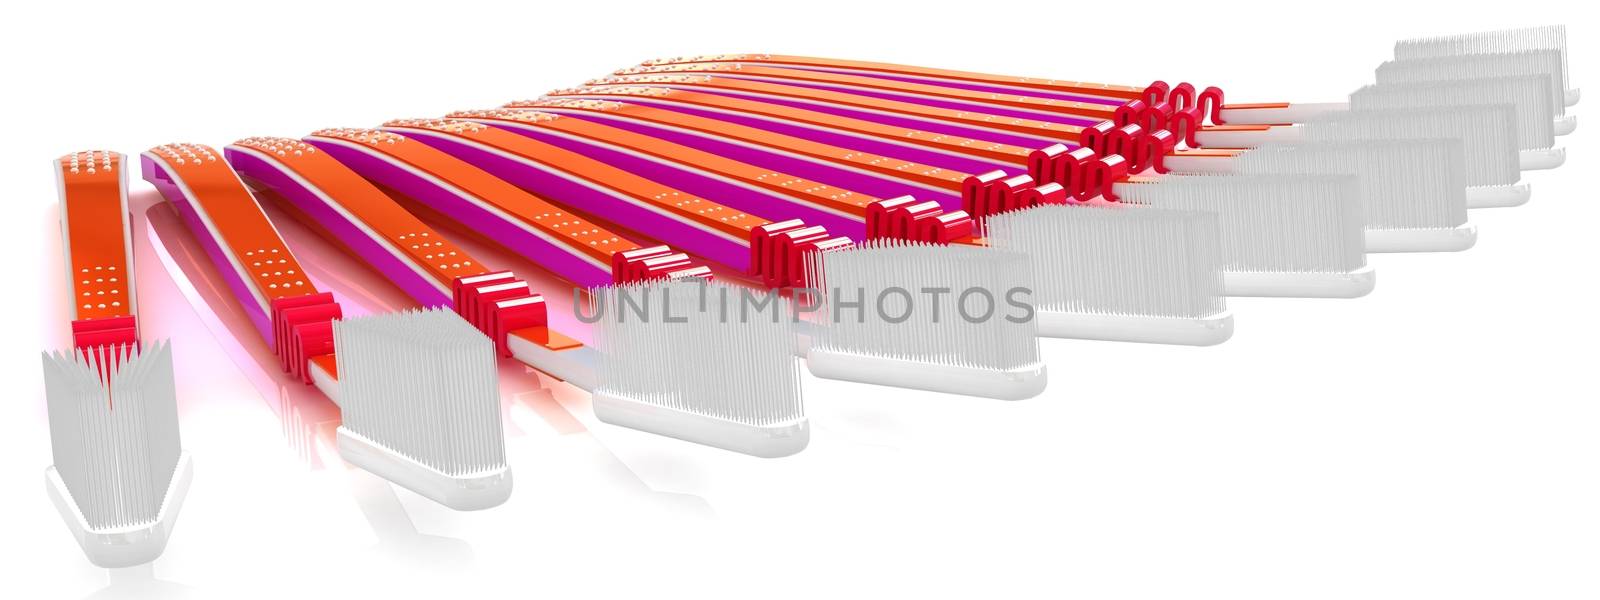 Toothbrushes on a white background 